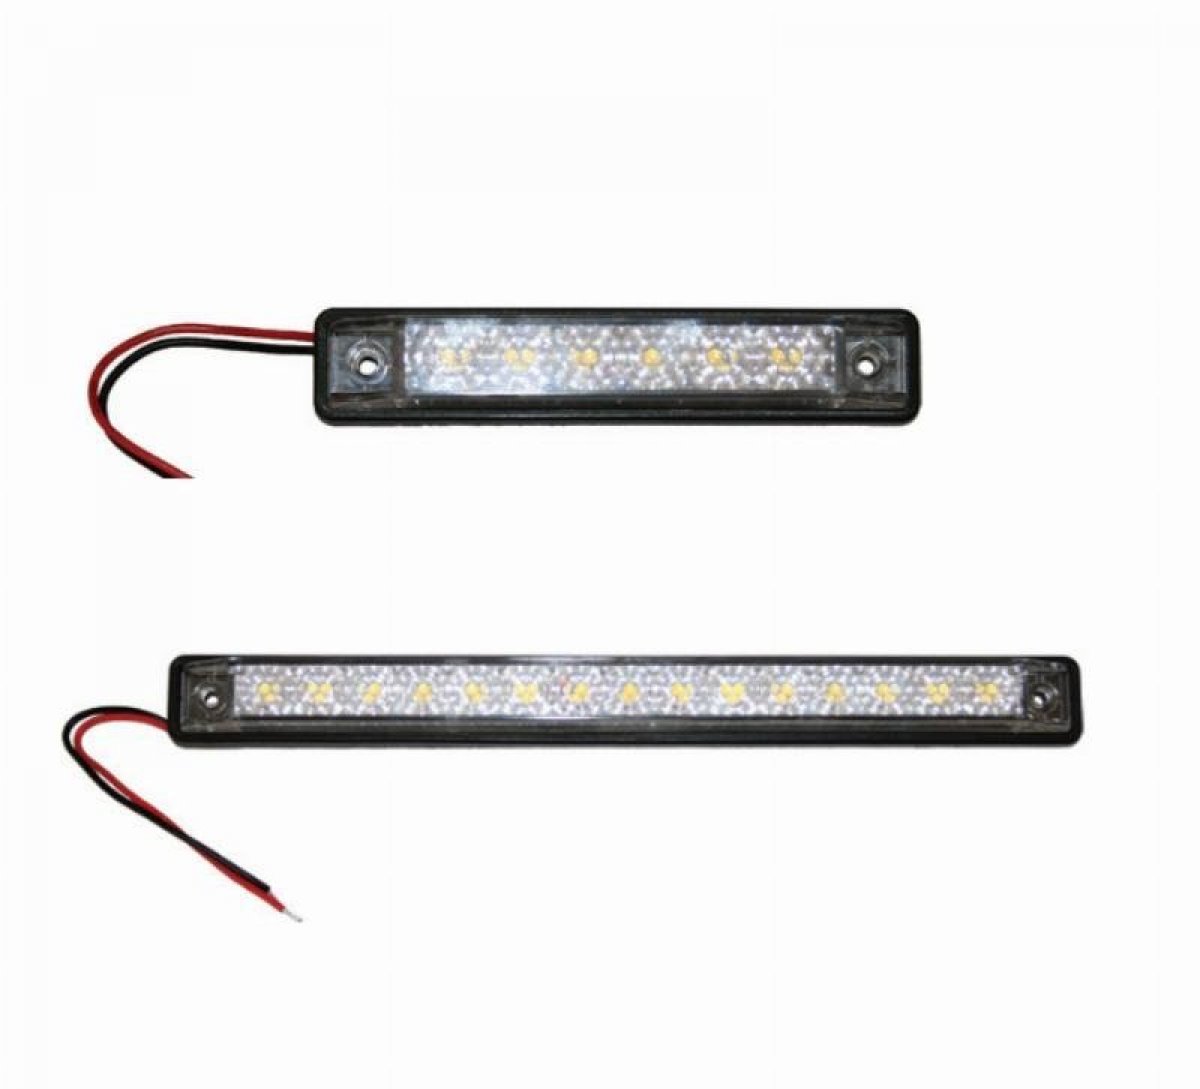 LED STRIP LIGHTS - 2 SIZES - IP67 WATERPROOF RATING - FROM ONLY $ 15.00 EAC